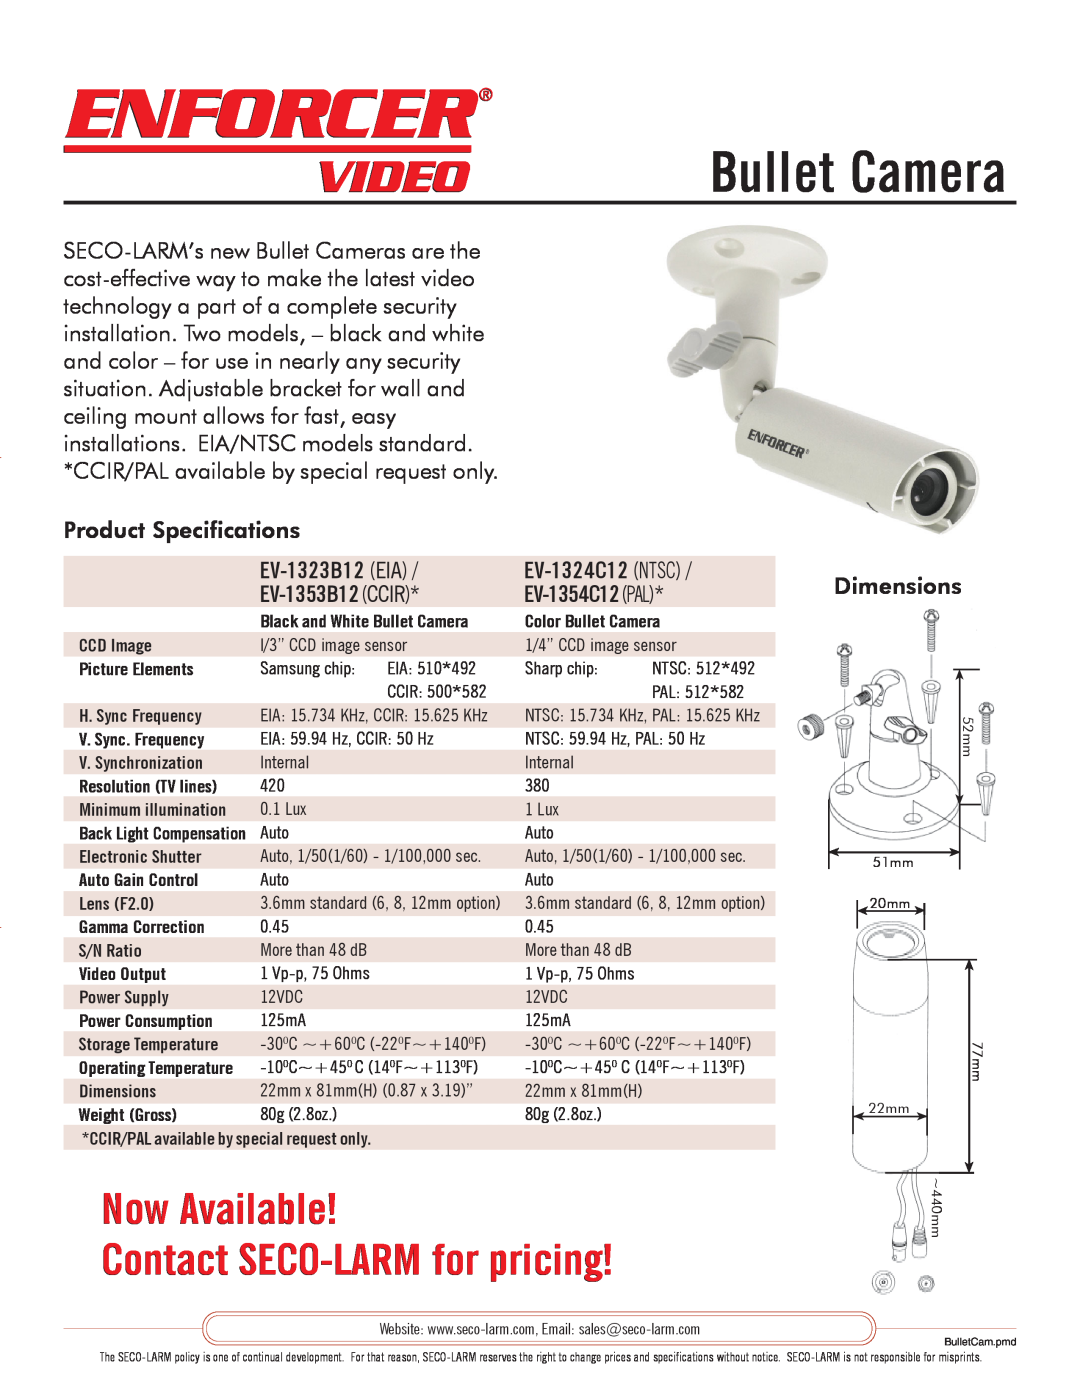 SECO-LARM USA EV-1324C12 (NTSC) dimensions Enforcer, Bullet Camera, Video, Now Available Contact SECO-LARM for pricing 